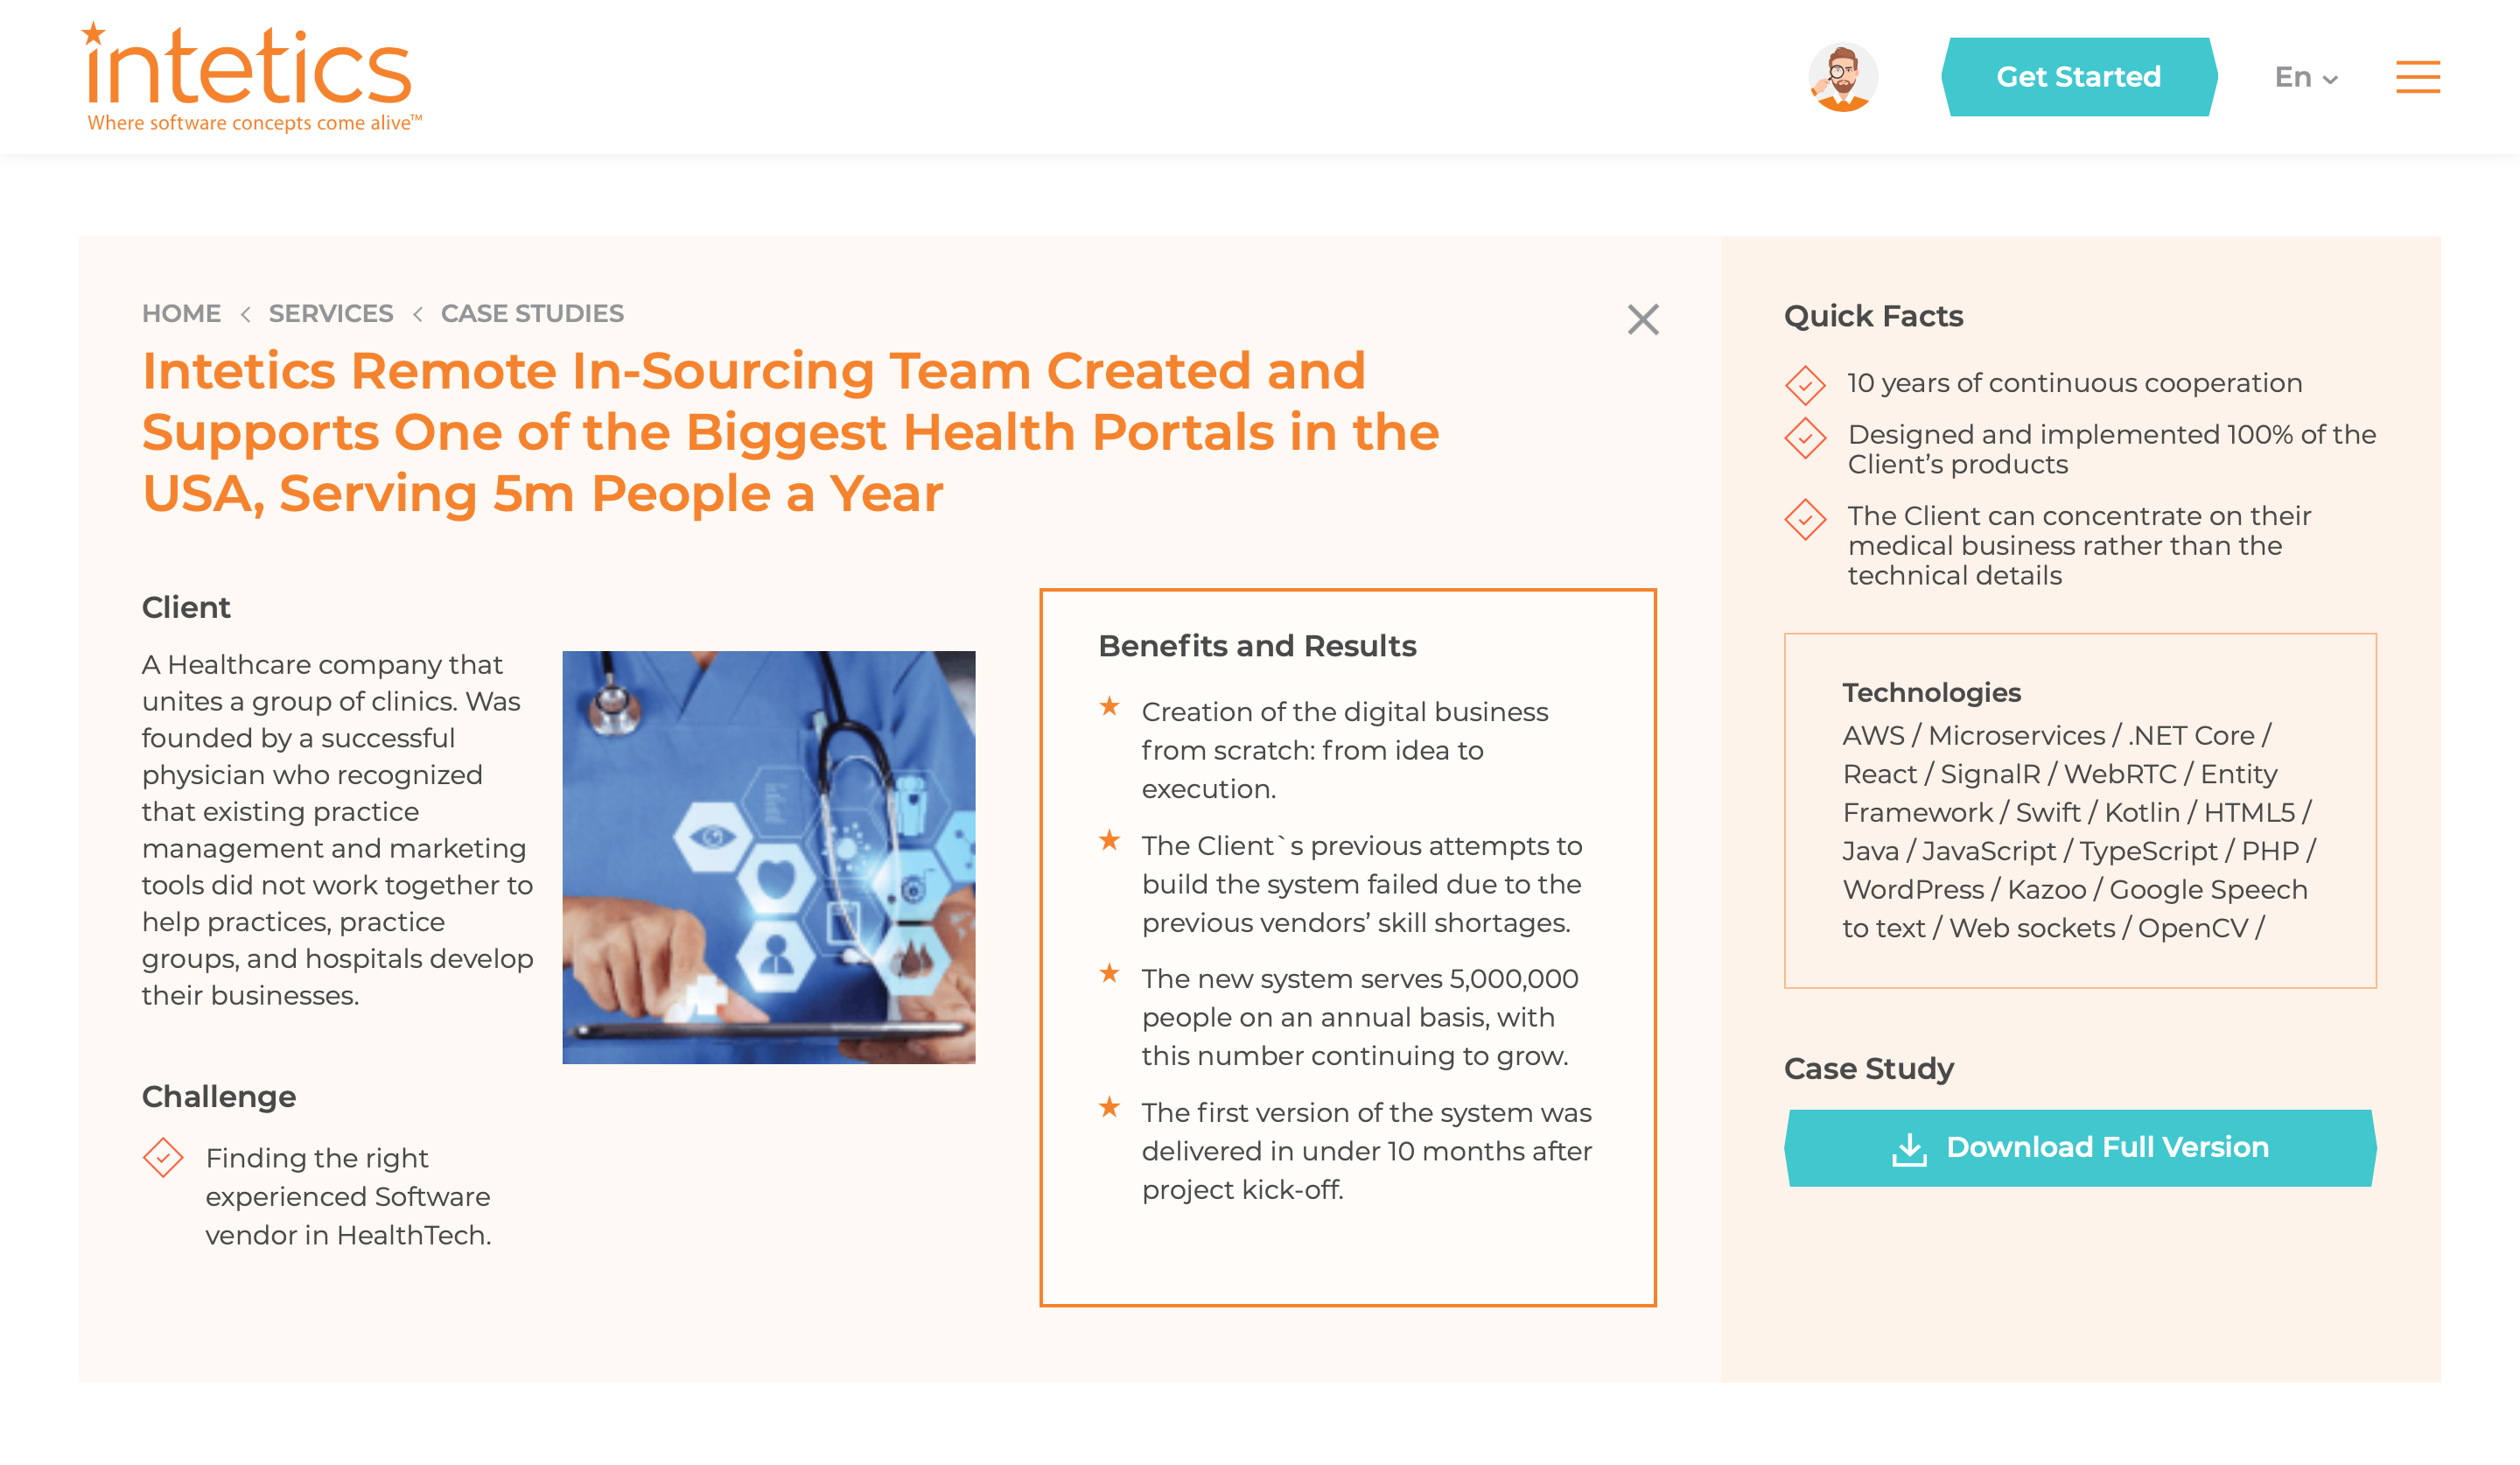 Intetics Remote In-Sourcing Team Created and Supports One of the Biggest Health Portals in the USA Serving 5m People a Year 